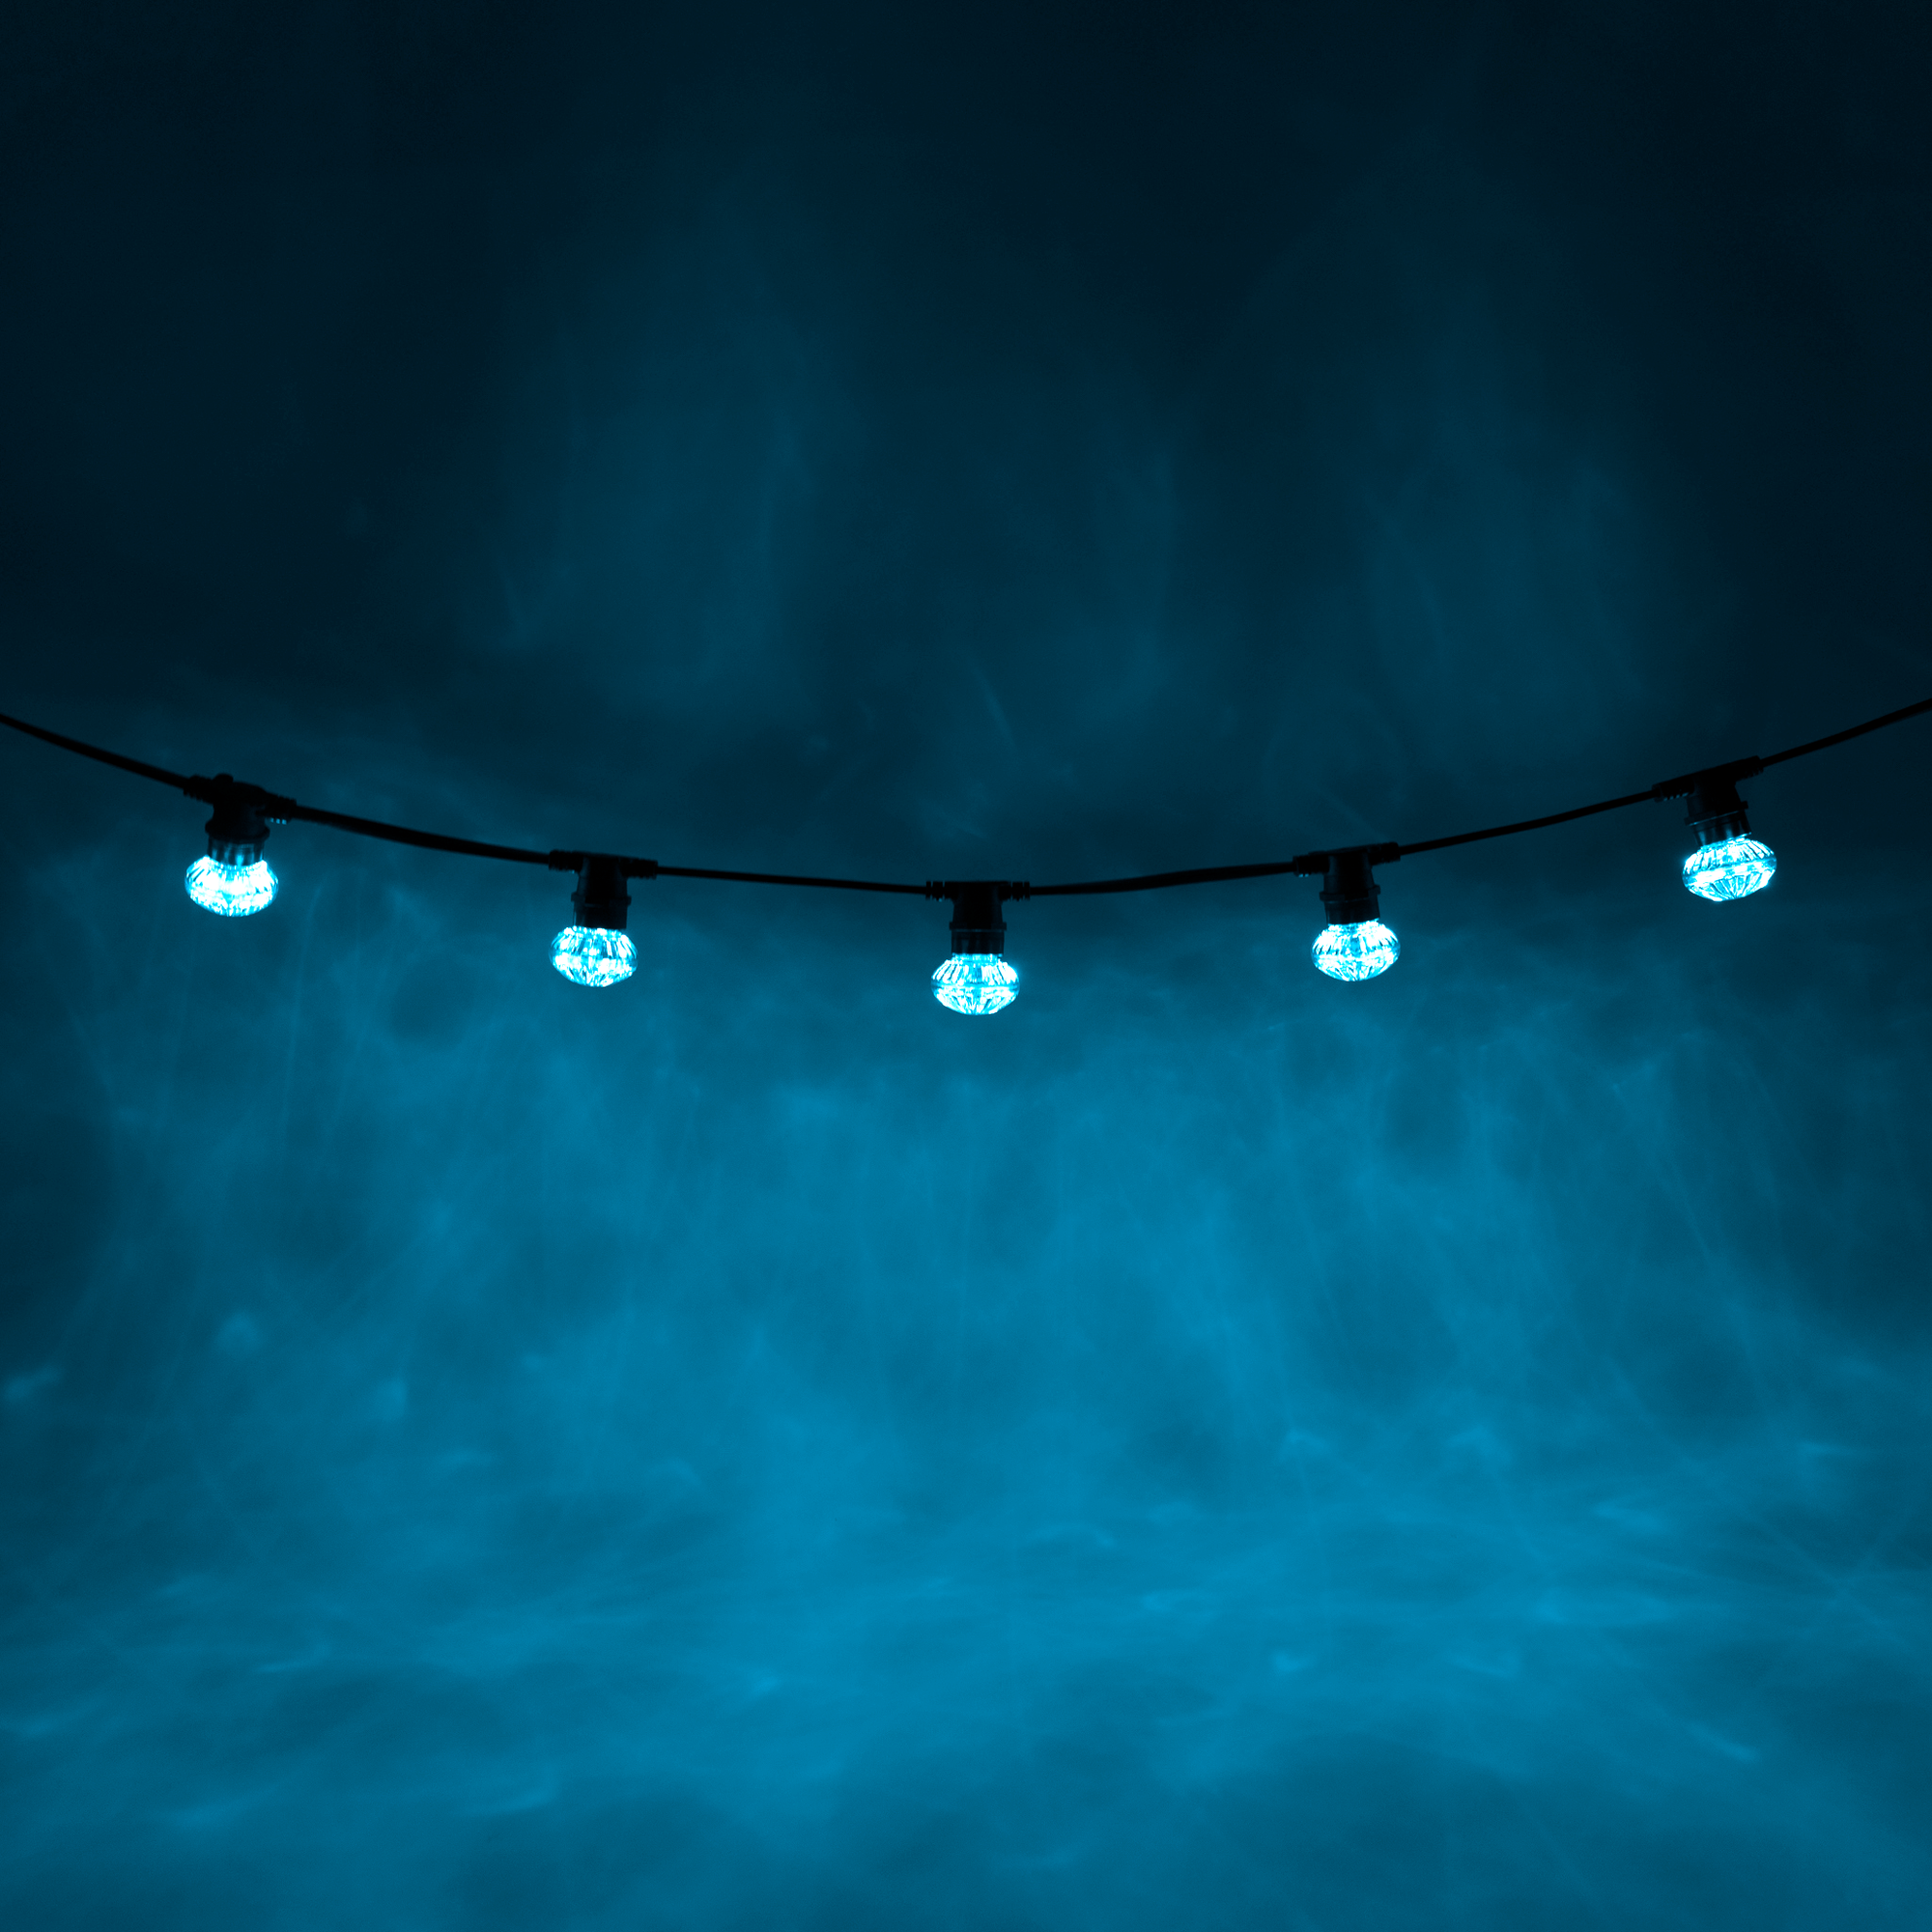 How to Choose the Right Festoon Bulbs for Your Event